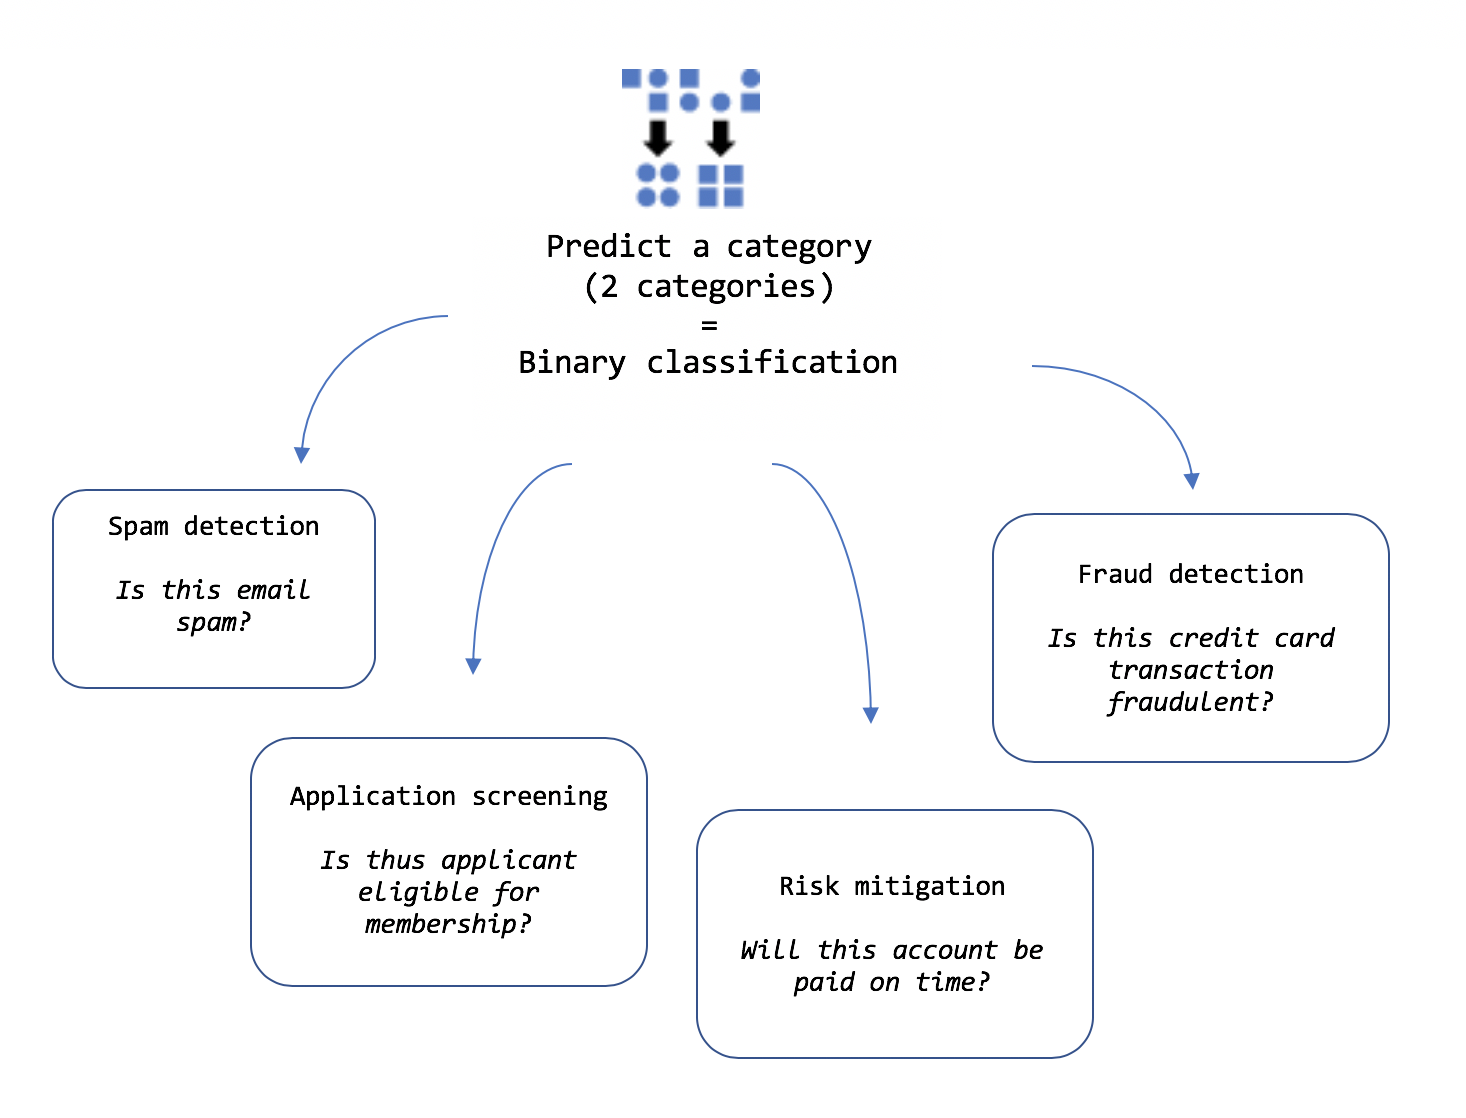 Diagram showing examples of binary classification including fraud detection, risk mitigation, and application screening